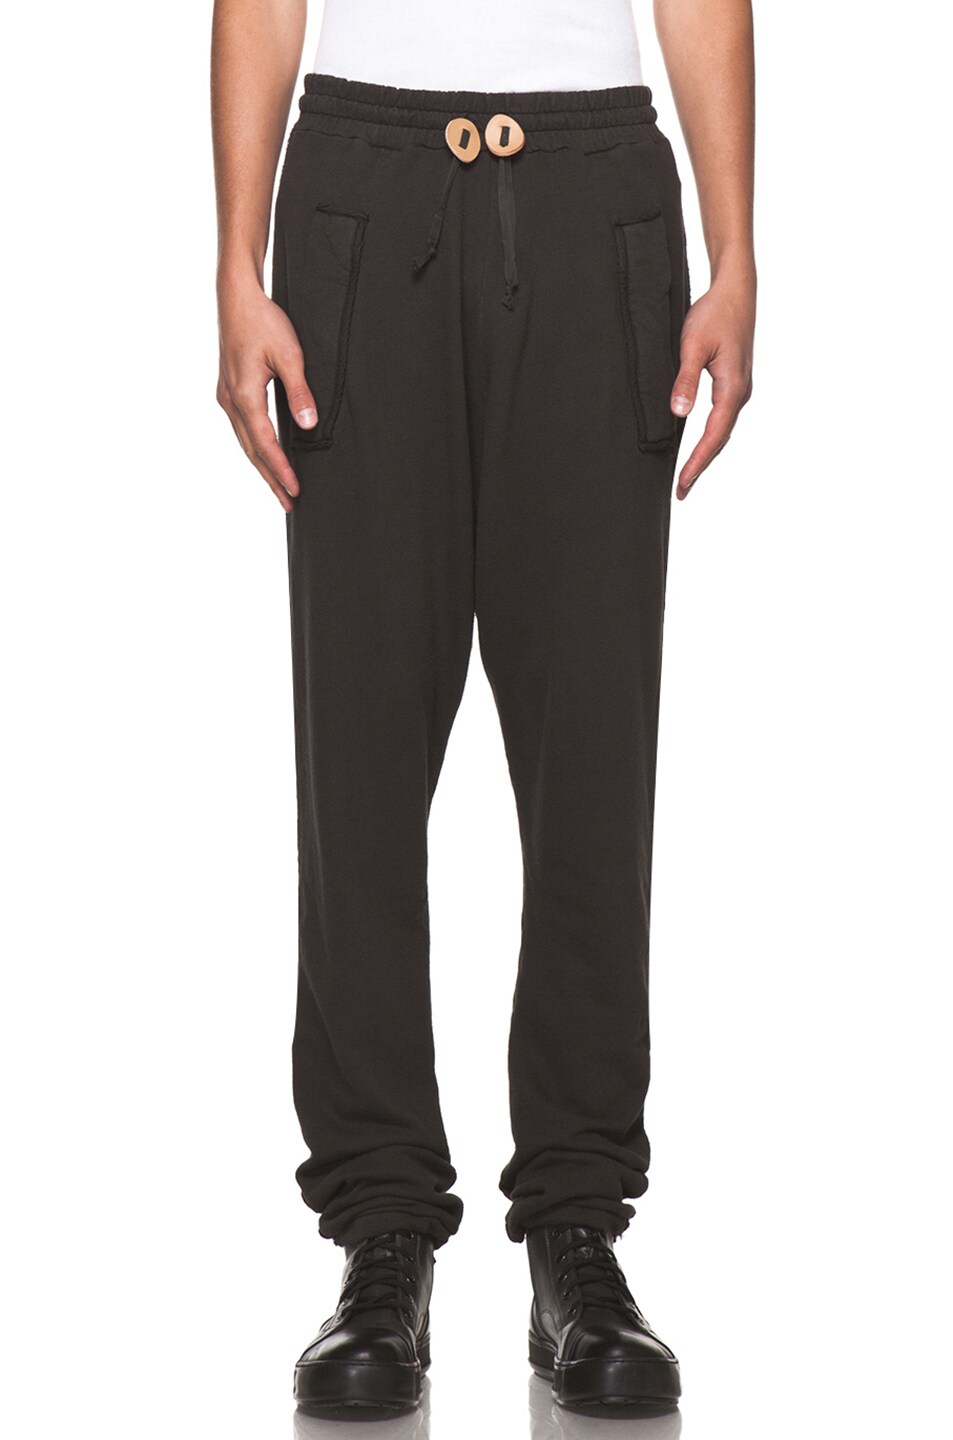 Image 1 of SILENT DAMIR DOMA Sweatpants in Ashes